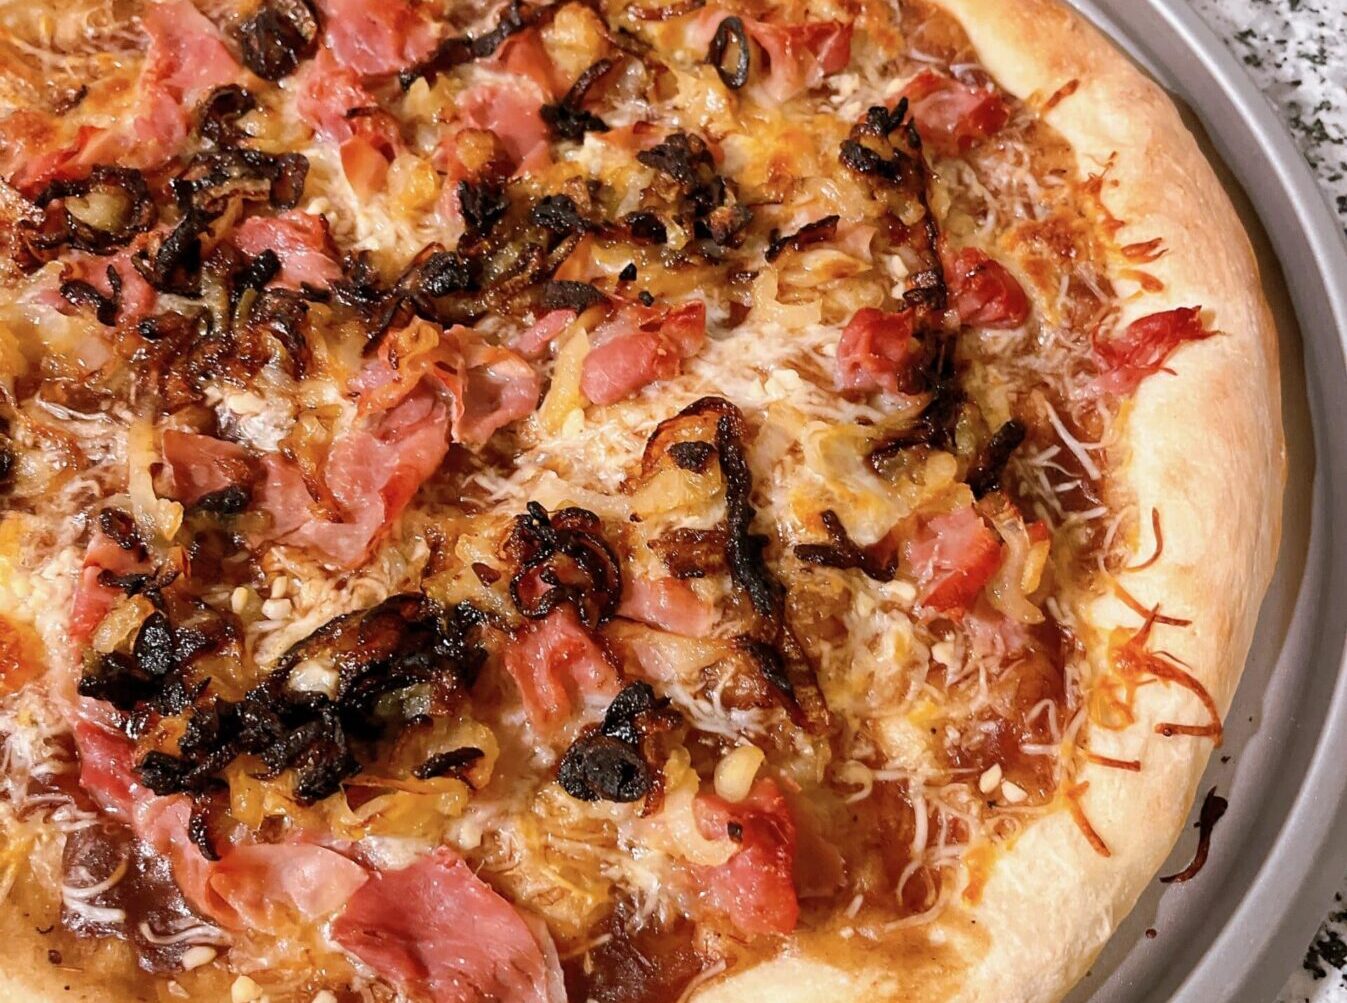 Barbecue Pizza with Prosciutto and Caramelized Onions